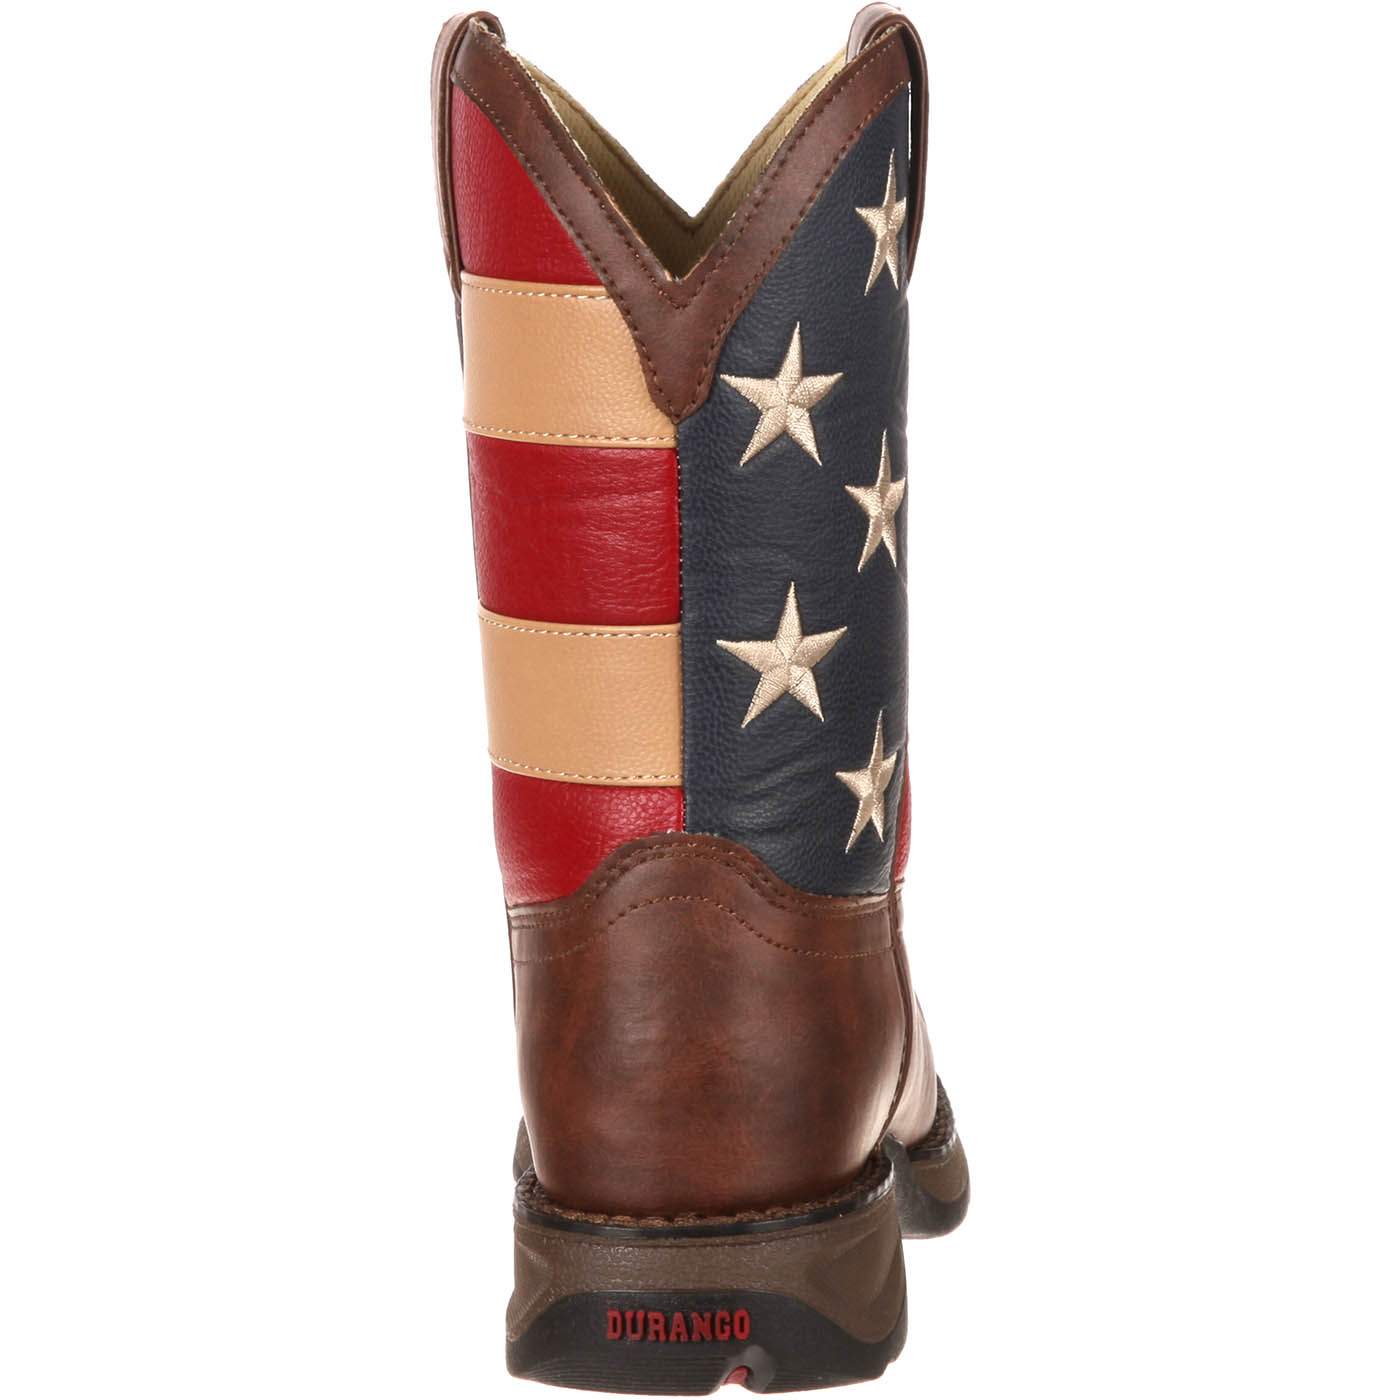 Lil' Durango: Kids' brown and flag western boots, #BT245